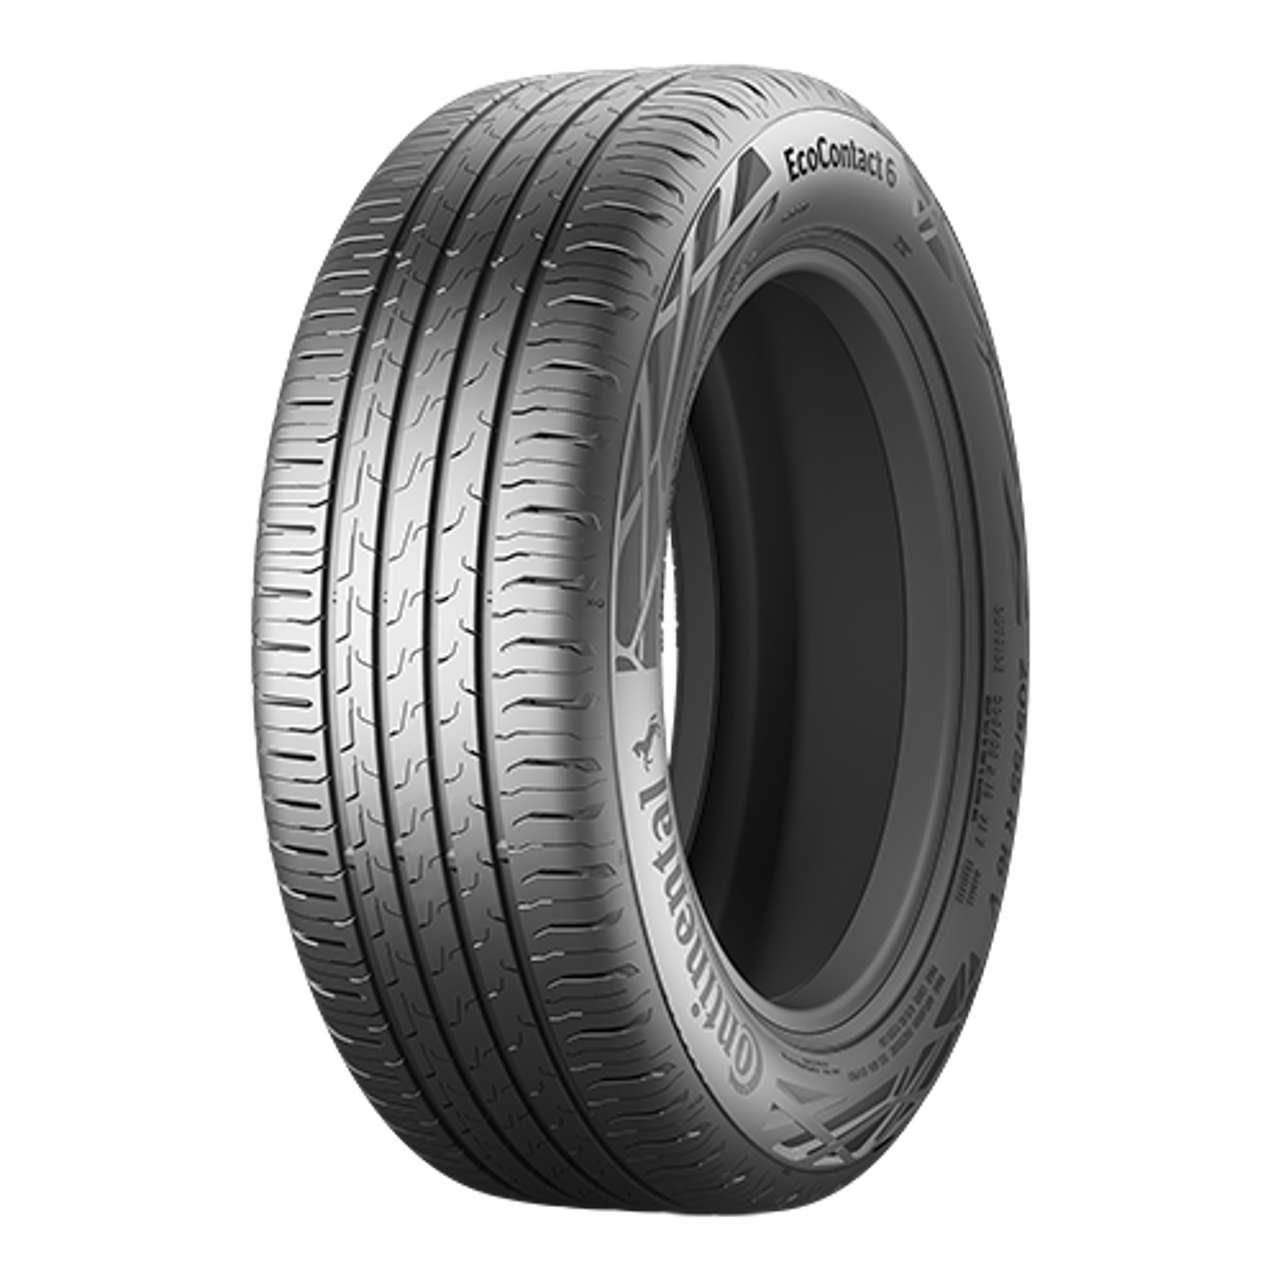 CONTINENTAL ECOCONTACT 6 (EVc) 185/65R15 88H von Continental